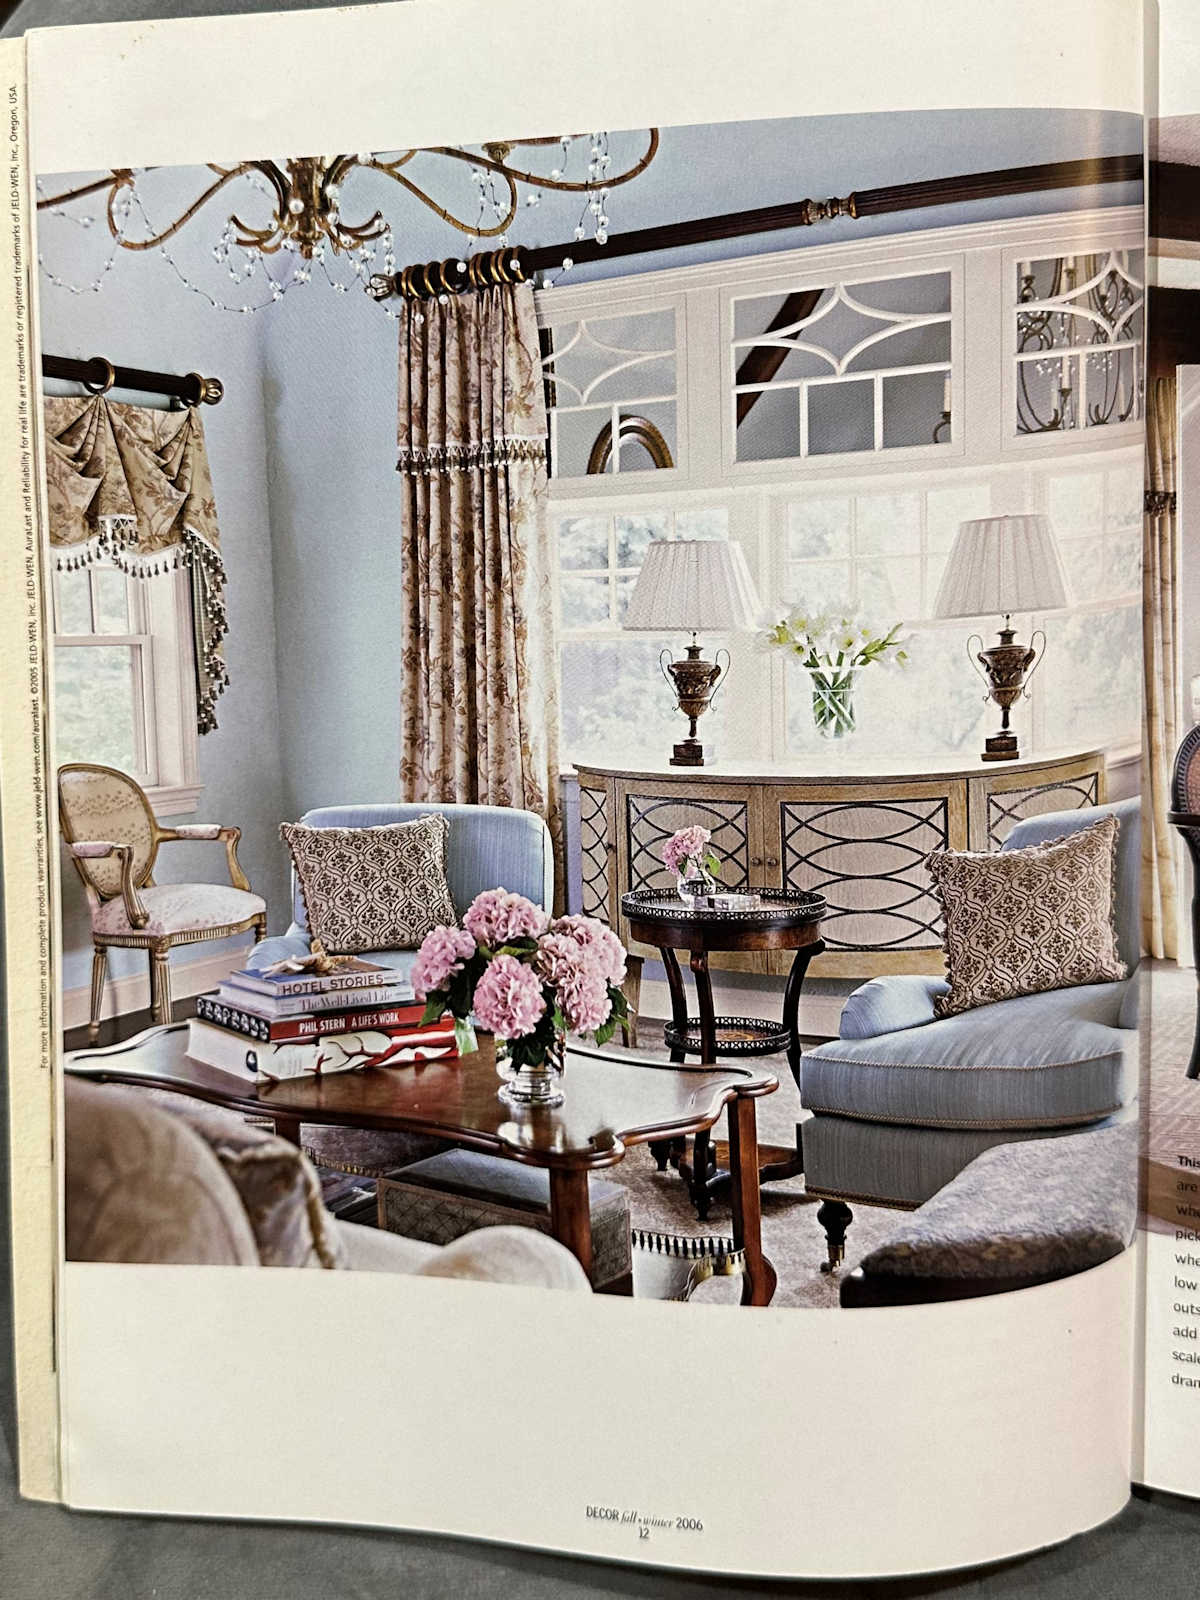 A light blue living room from 2006. Is it a timeless design in 2023?